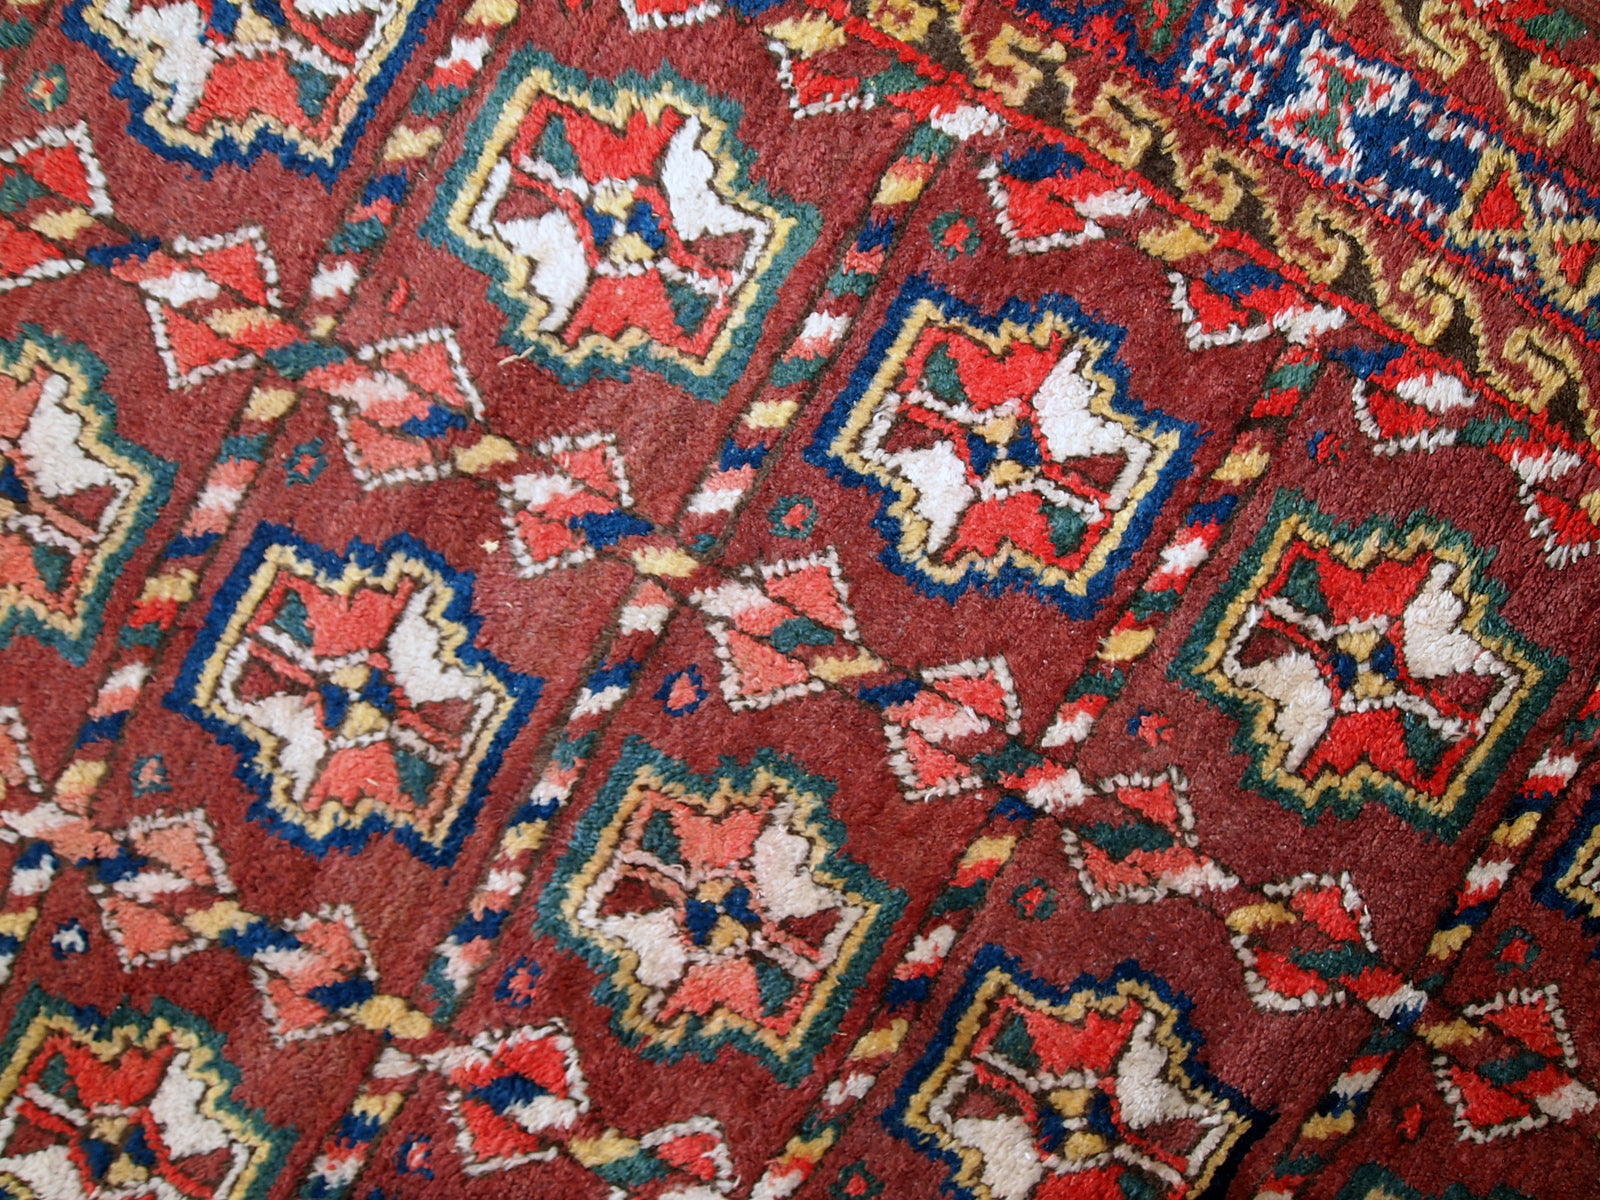 This antique Kurdish rug made in deep shade of burgundy. All-over design with geometric and tribal accents. The wool on the rug is soft, it is in original good condition.